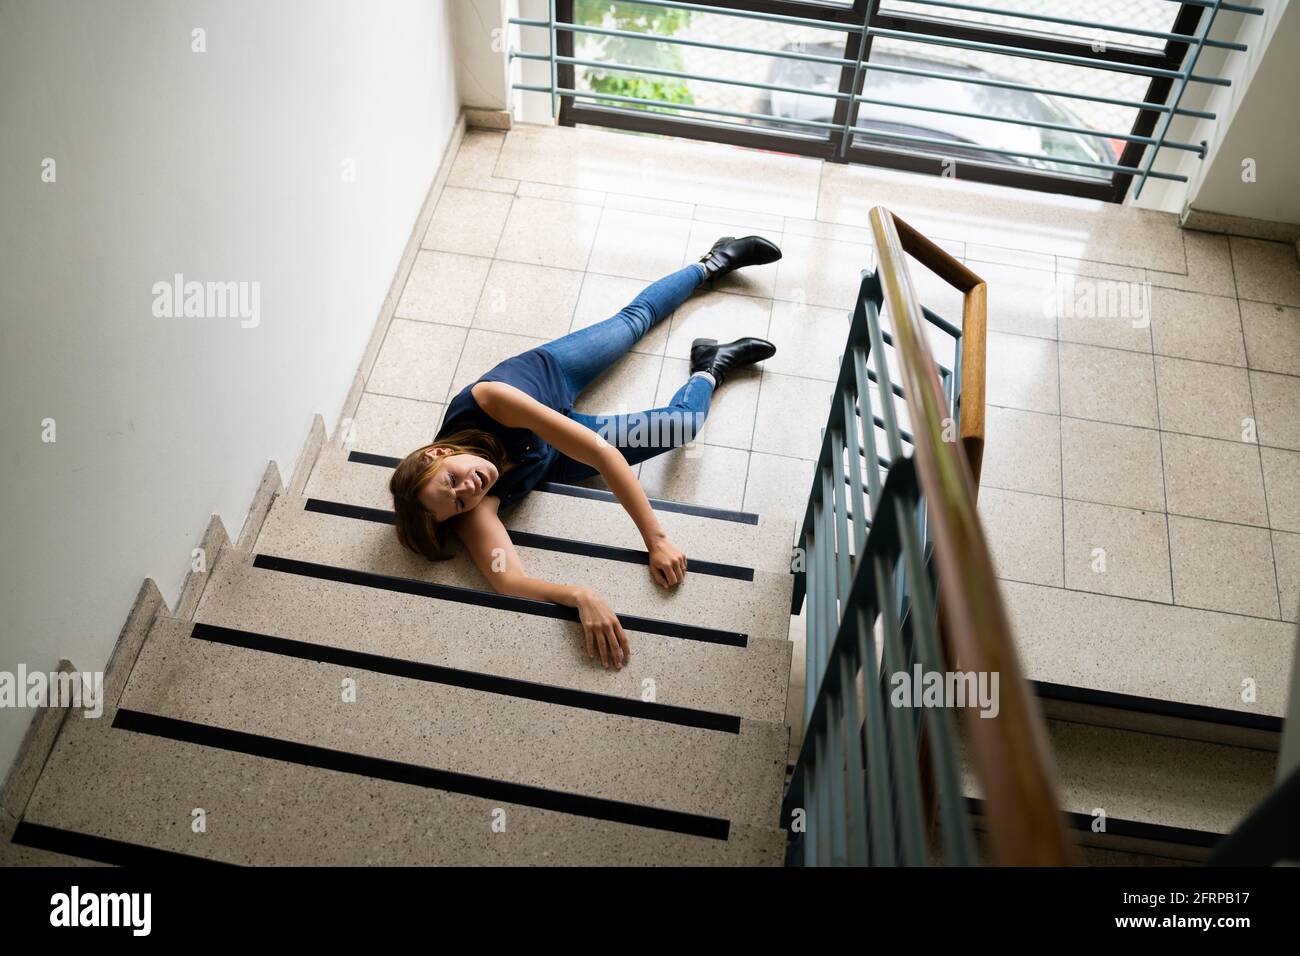 Slip And Fall Accident On Stairs. Worker Woman Fallen Down Stock Photo -  Alamy